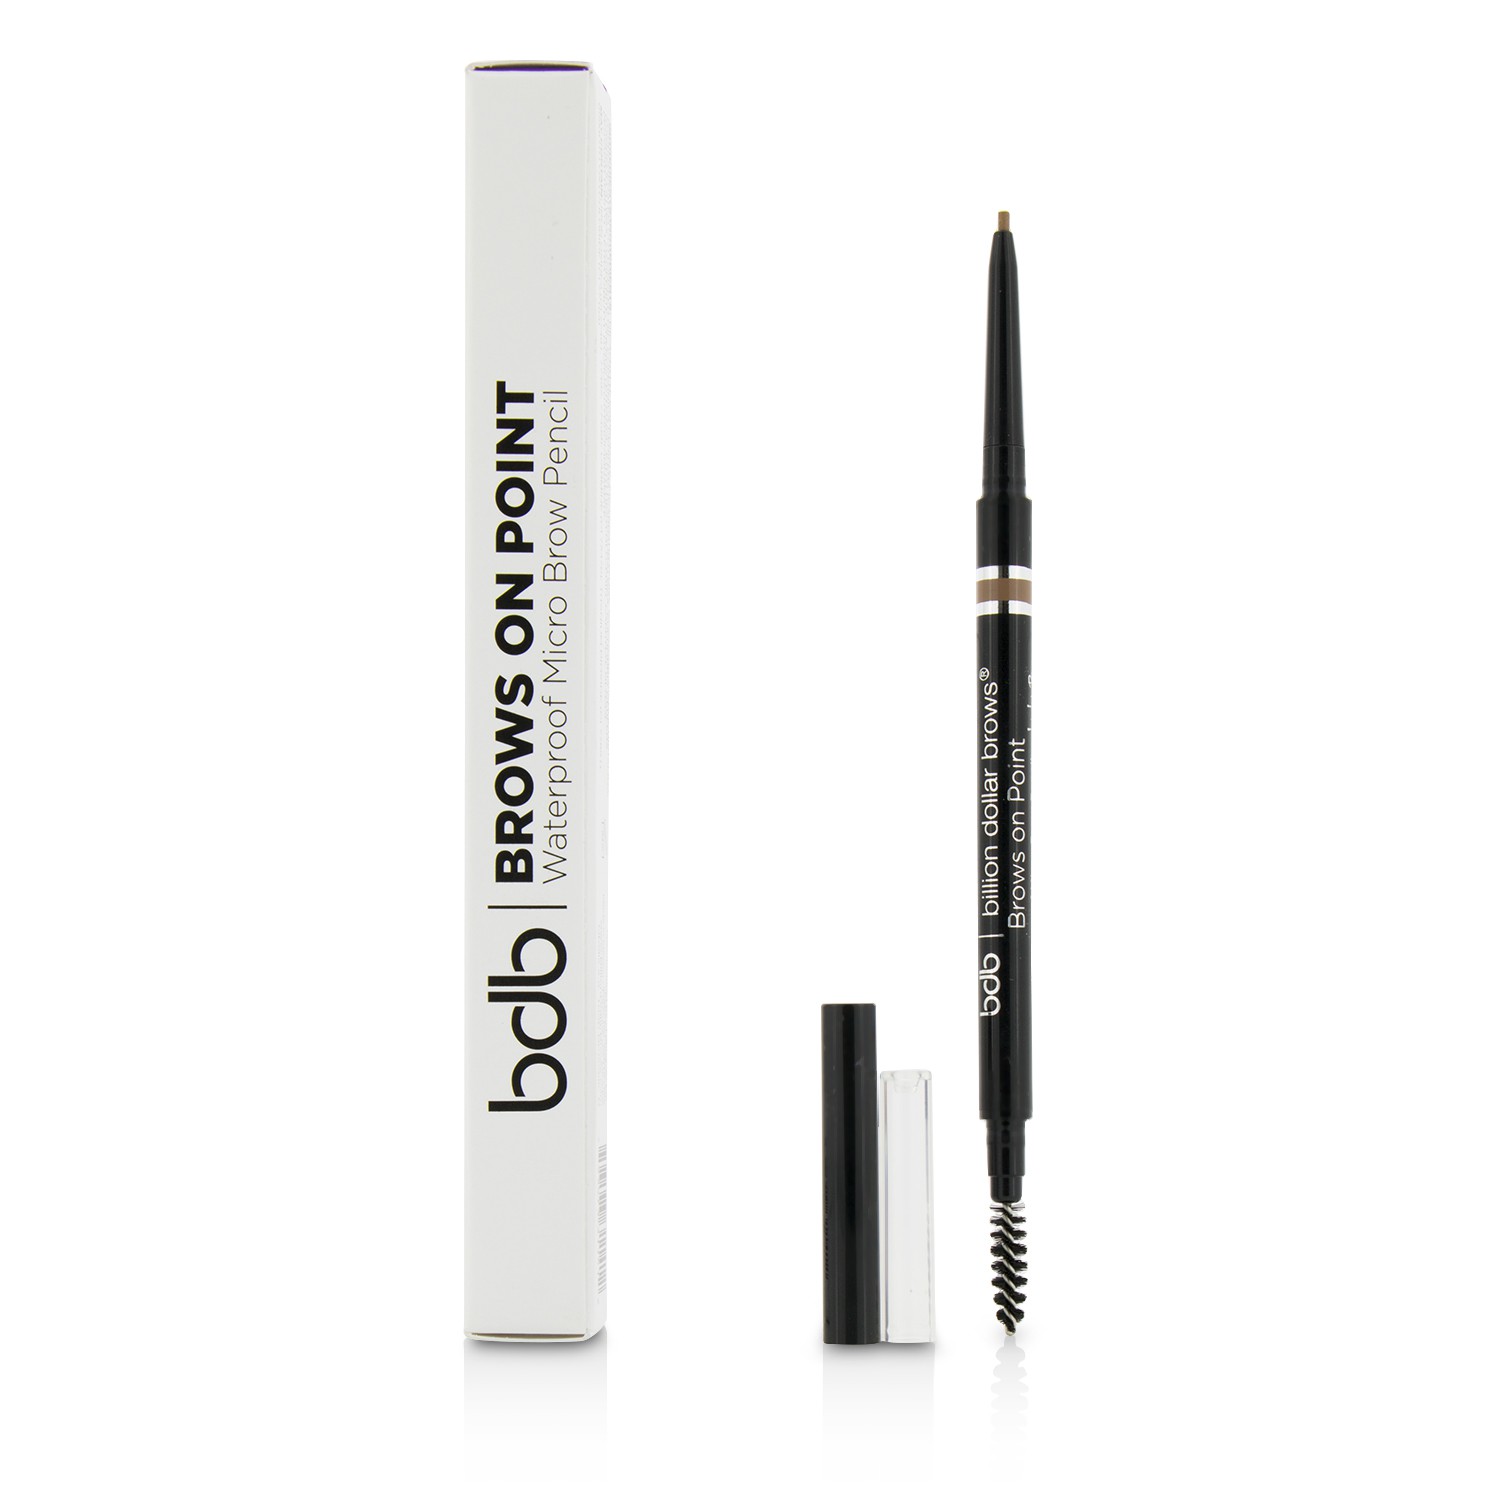 Brows On Point Waterproof Micro Brow Pencil - Light Brown Billion Dollar Brows Image